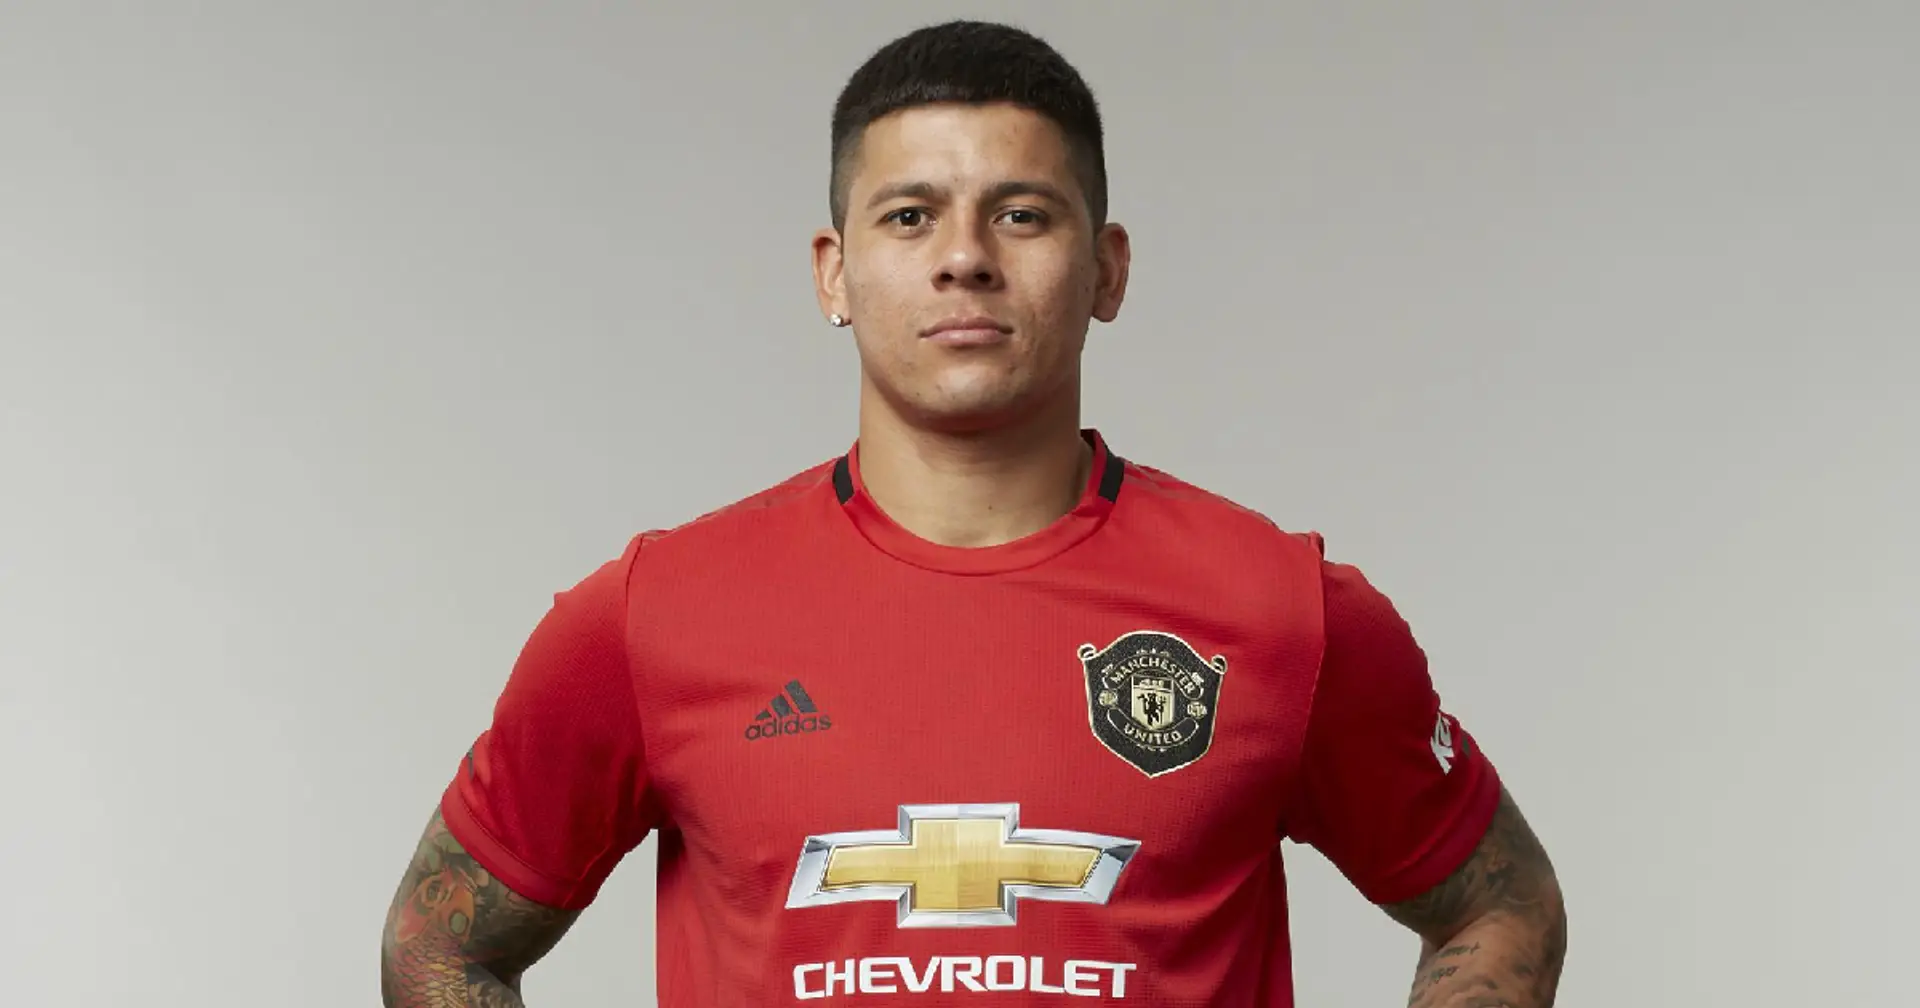 'I've always felt privileged to be part of this incredible club': Marcos Rojo's farewell message to Man United fans